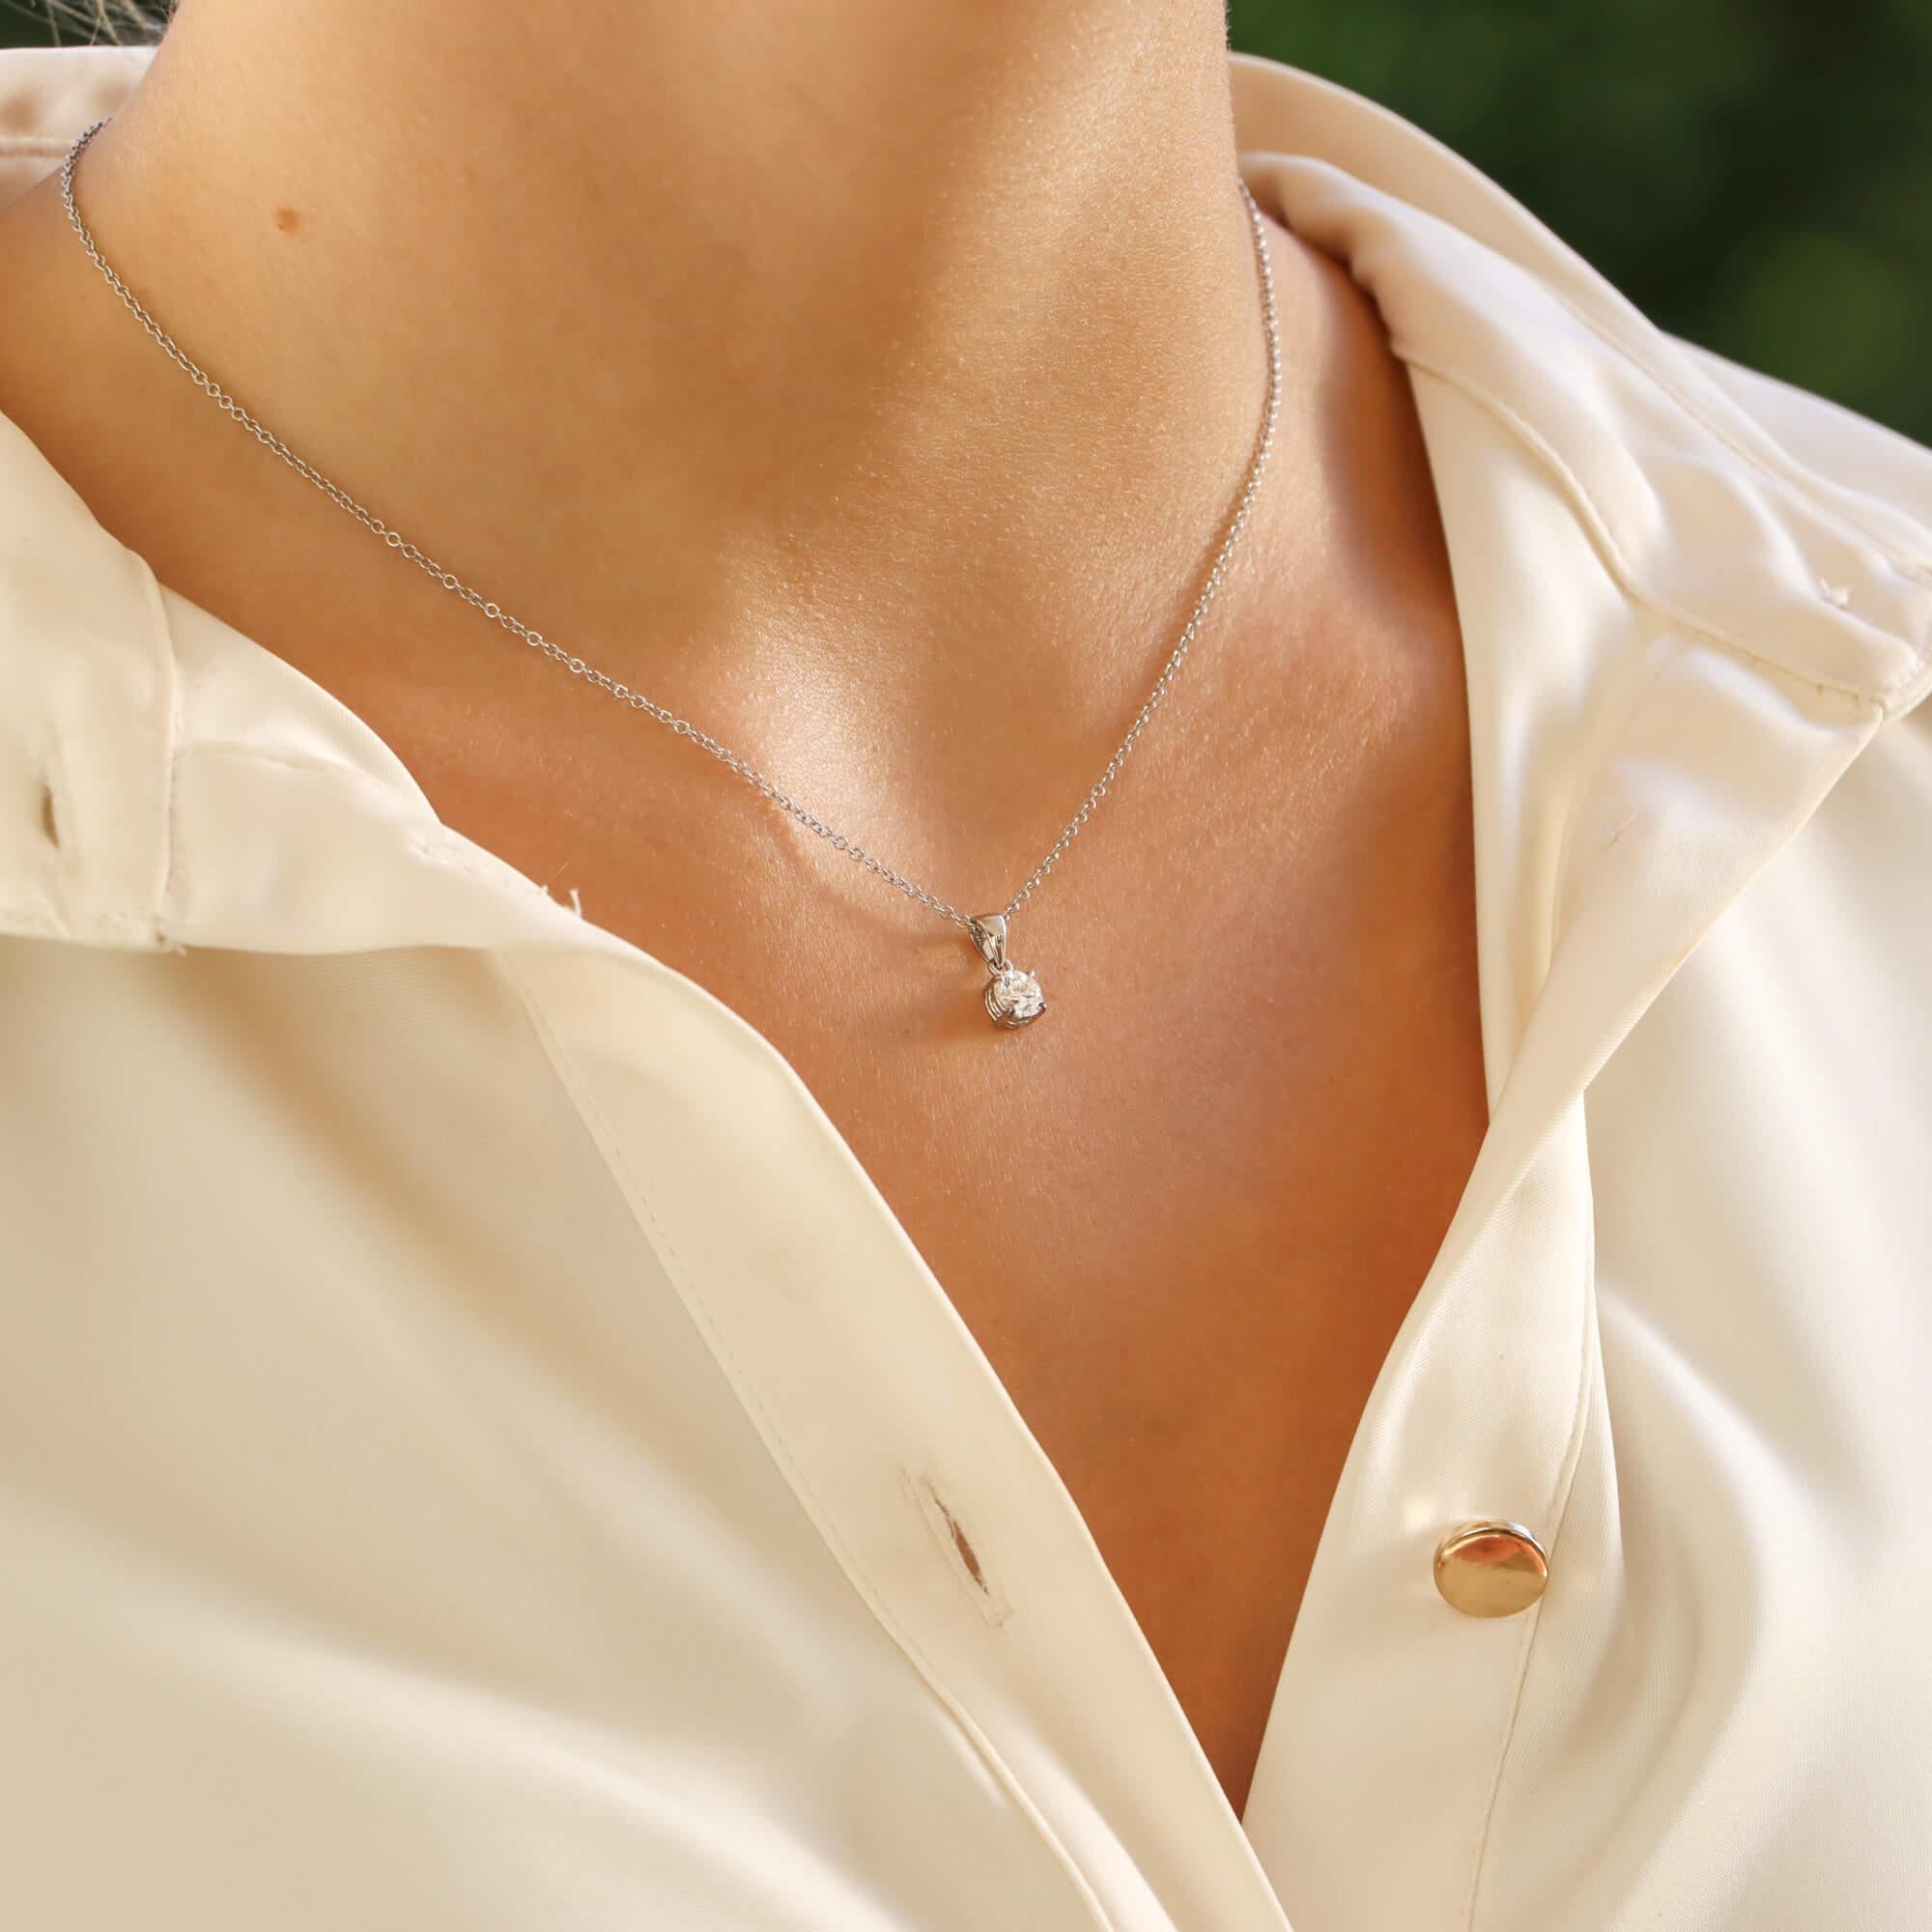 A beautiful vintage single solitaire diamond pendant set in 18k white gold.

The pendant is solely set with a sparkly round brilliant cut diamond that is four claw set to centre. The pendant hangs from a 18-inch white gold trace chain.

Due to the